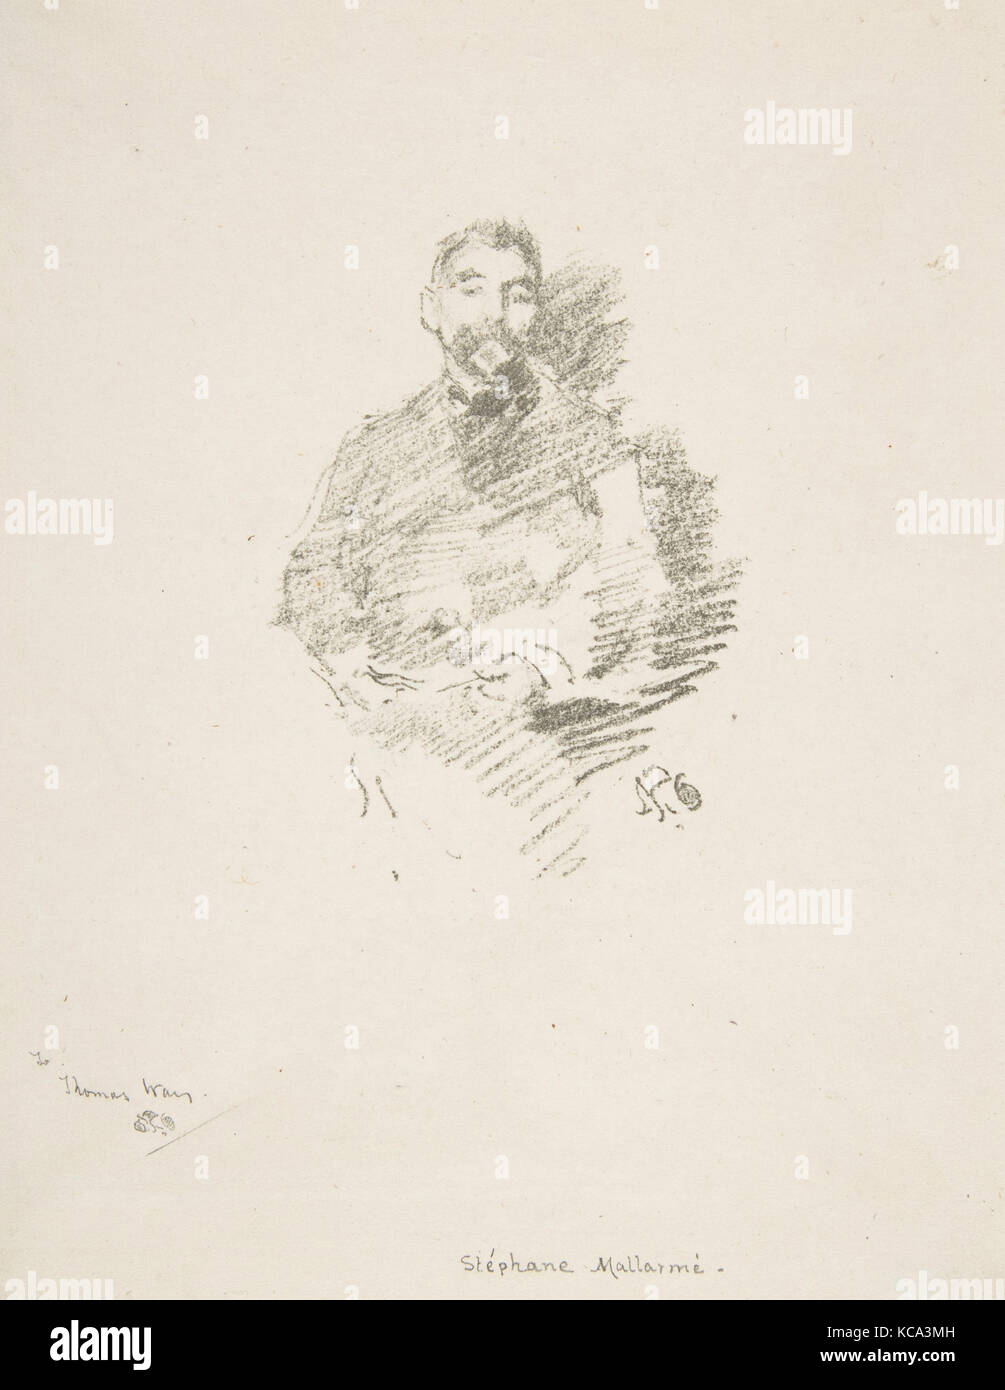 Stéphane Mallarmé, 1892, Transfer lithograph, drawn on thin, transparent transfer paper; only state (Chicago); printed in gray Stock Photo